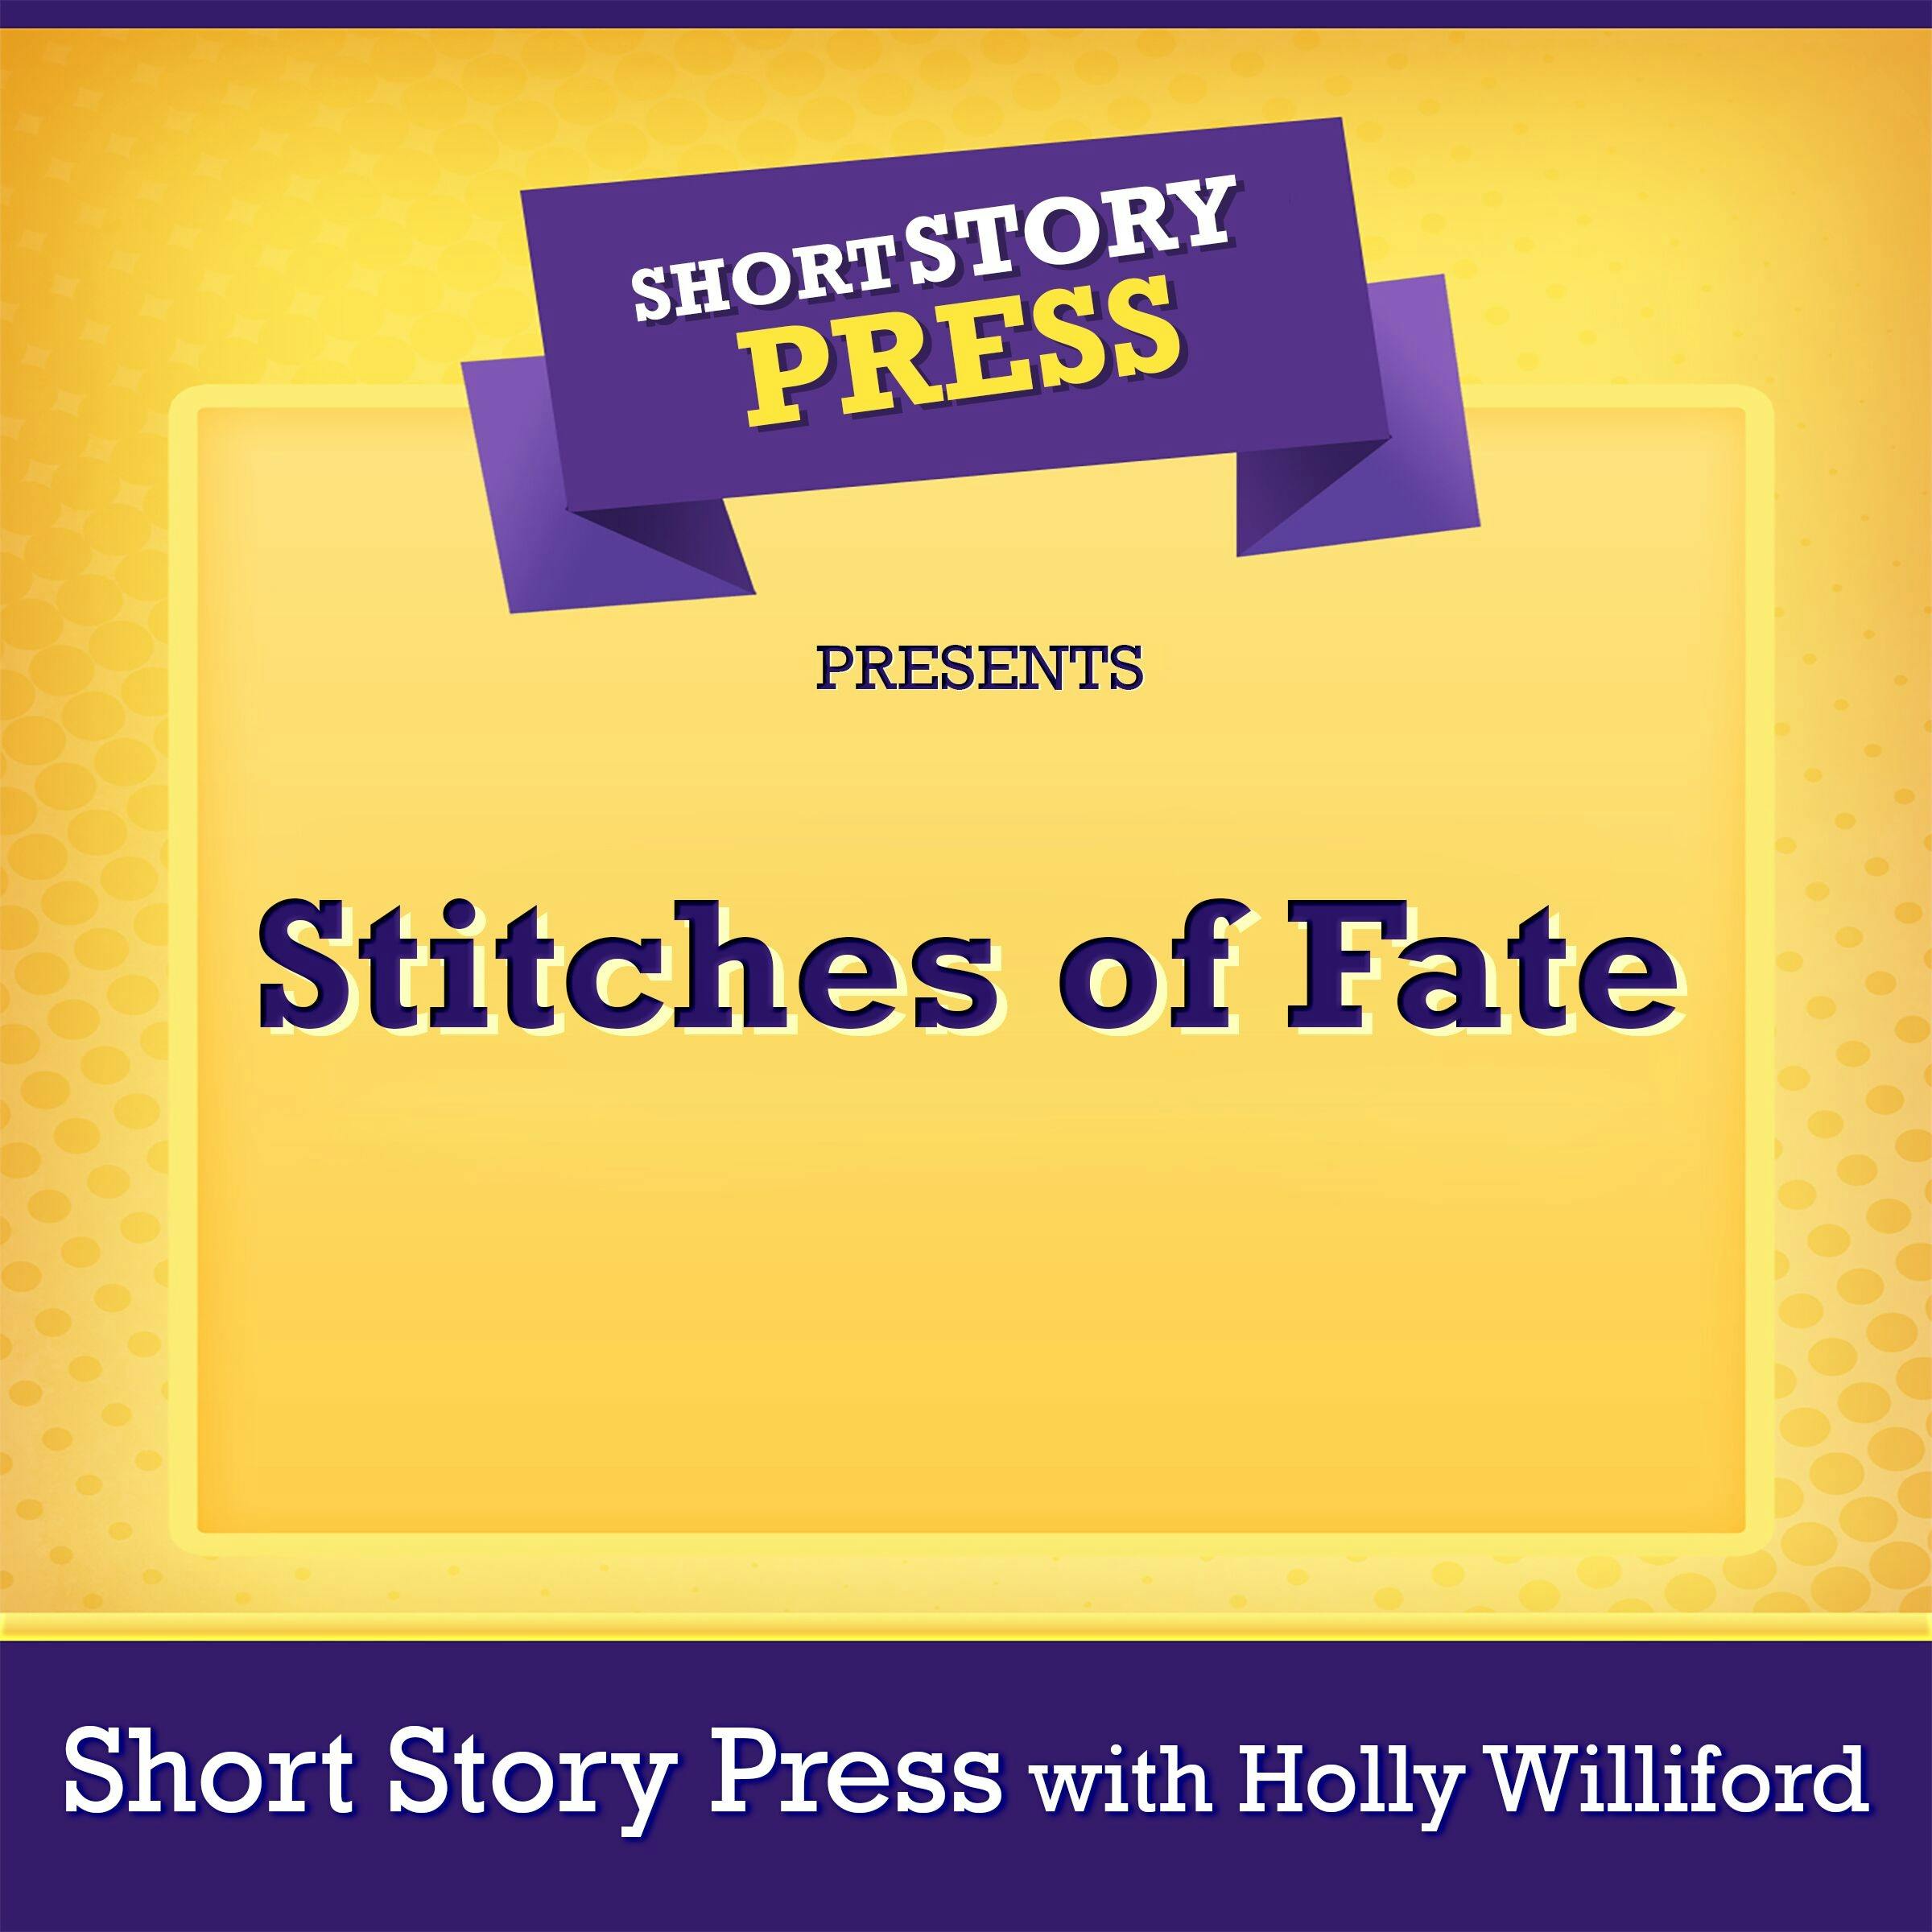 Short Story Press Presents Stitches of Fate - Holly Williford, Short Story Press